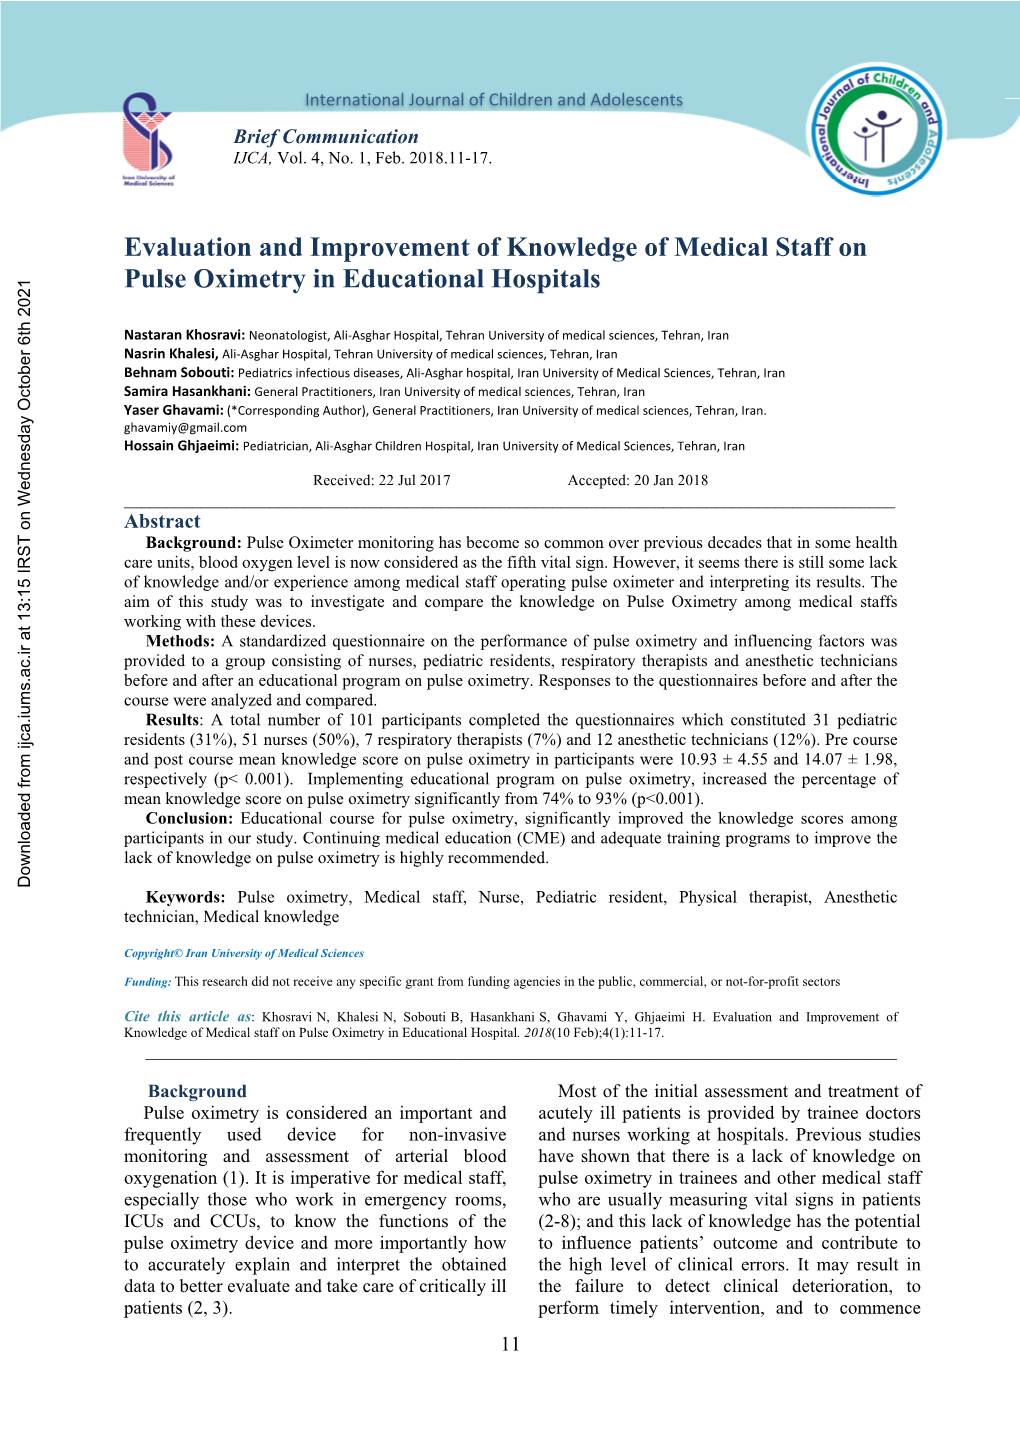 Evaluation and Improvement of Knowledge of Medical Staff on Pulse Oximetry in Educational Hospitals